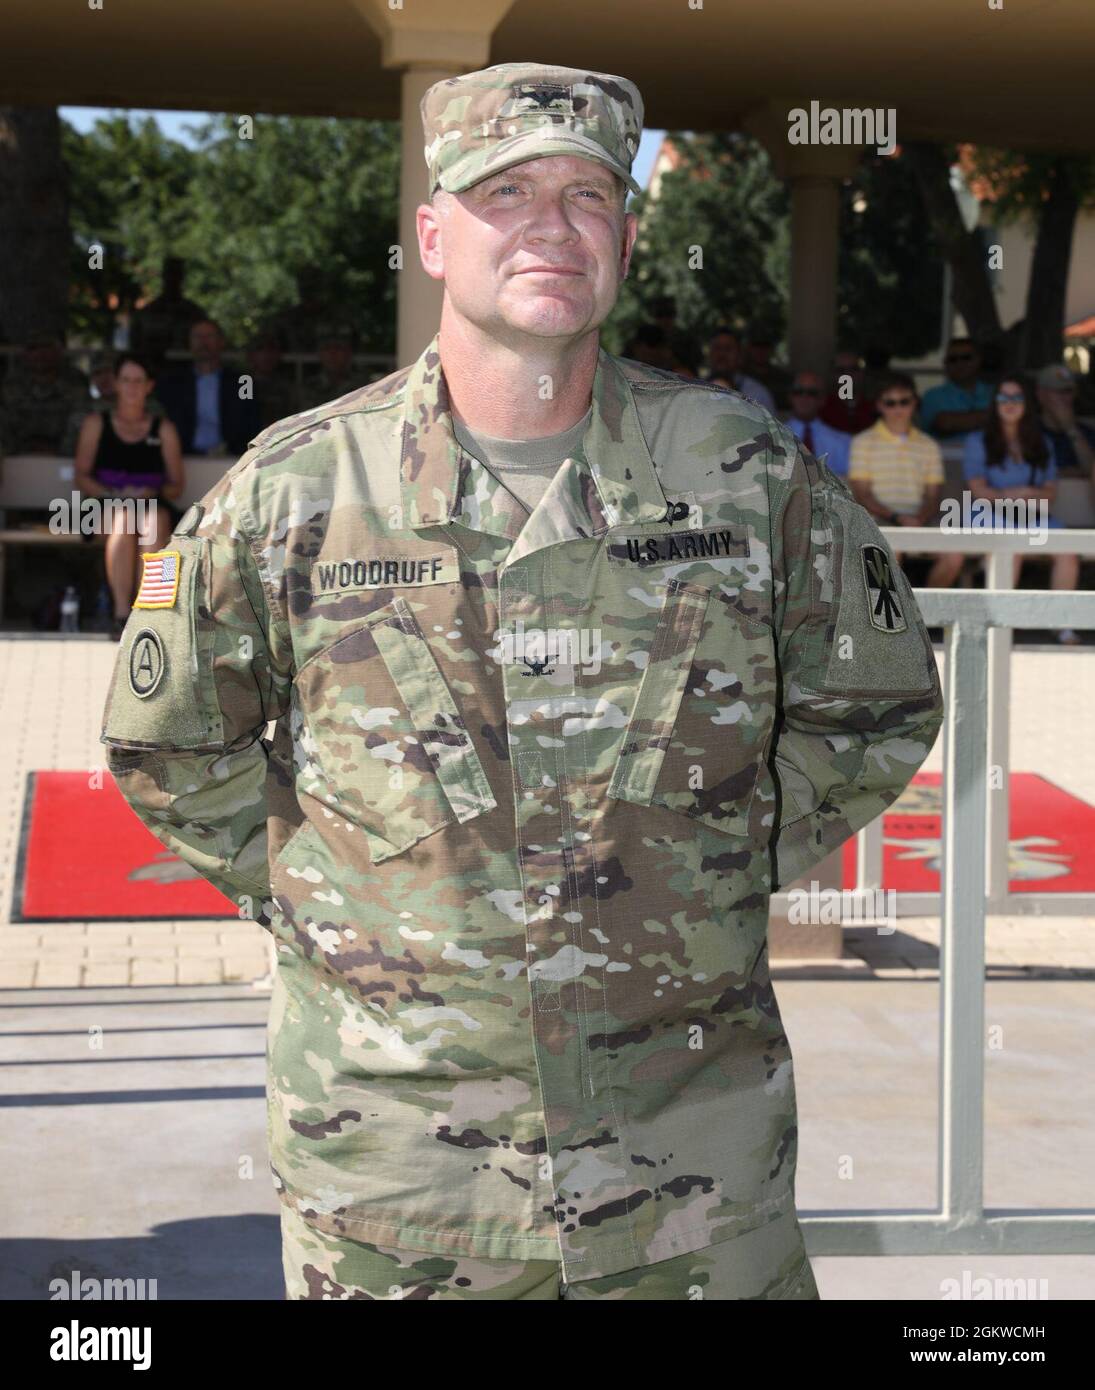 Col. Timothy L. Woodruff, brigade commander, 11th Air Defense Artillery Brigade, 32d Army Air and Missile Defense Command, poses for a photograph after the change of command. Col. John L. Dawber, commander, 11th ADA BDE, relinquished command to Woodruff, July 9, 2021, on Noel Parade Field, Fort Bliss, Texas Stock Photo